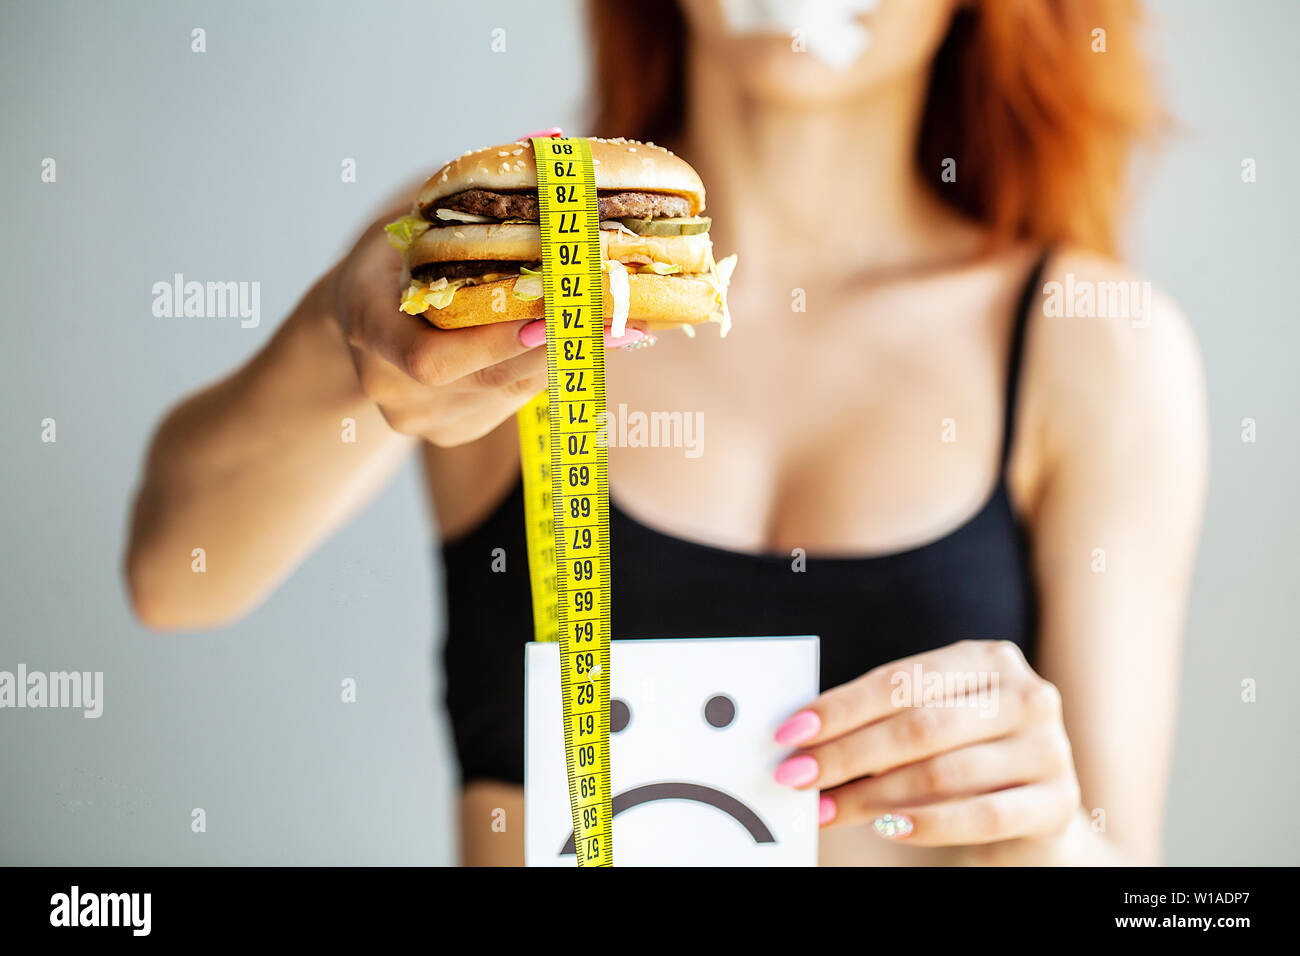 Diet. Portrait woman wants to eat a Burger but stuck skochem mouth, the concept of diet, junk food, willpower in nutrition. Stock Photo